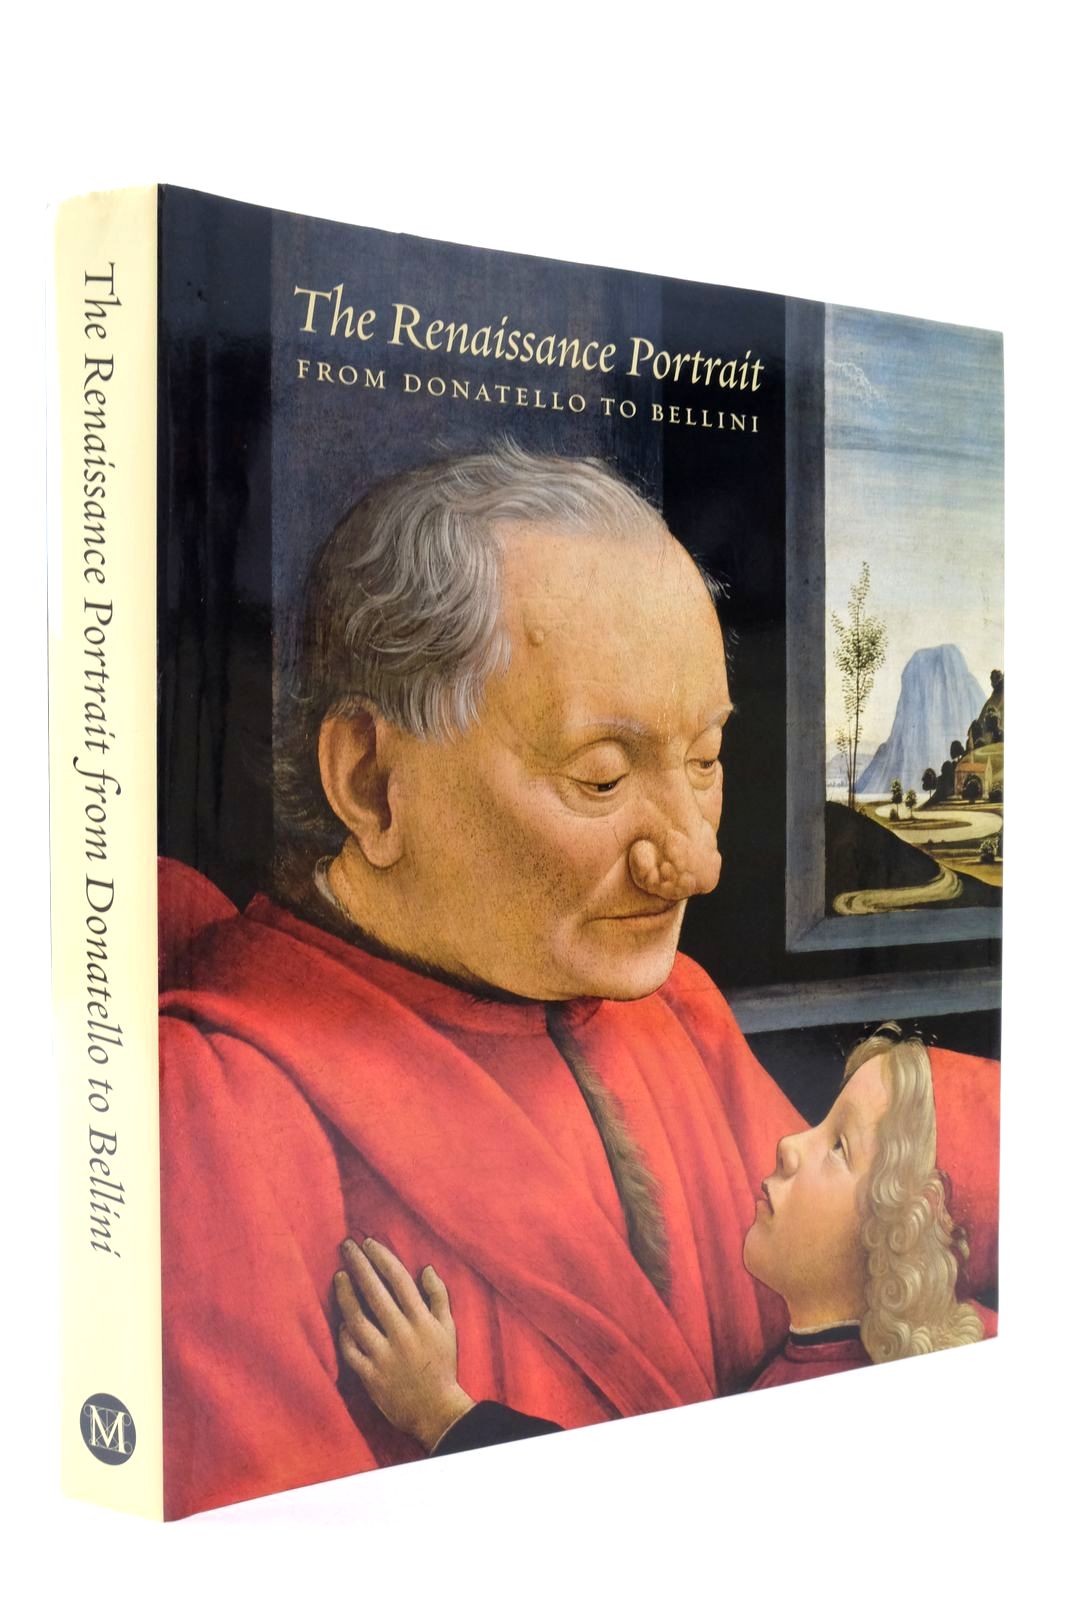 Photo of THE RENAISSANCE PORTRAIT FROM DONATELLO TO BELLINI written by Christiansen, Keith Weppelmann, Stefan et al, illustrated by Donatello, Bellini, Giovanni et al., published by The Metropolitan Museum of Art, Yale University Press (STOCK CODE: 2138869)  for sale by Stella & Rose's Books